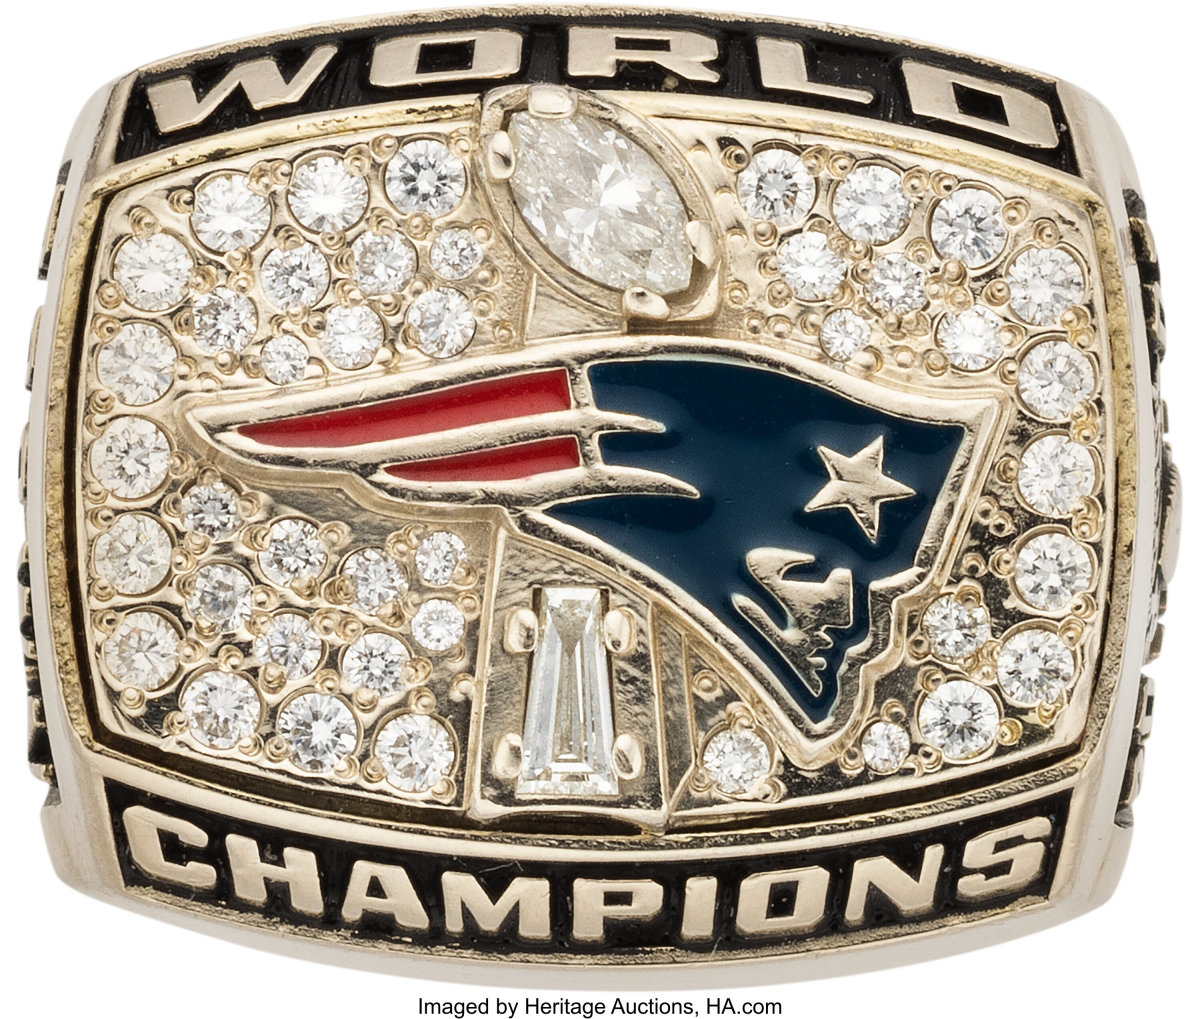 2001 New England Patriots Super Bowl ring presented to wide receiver Troy Brown.